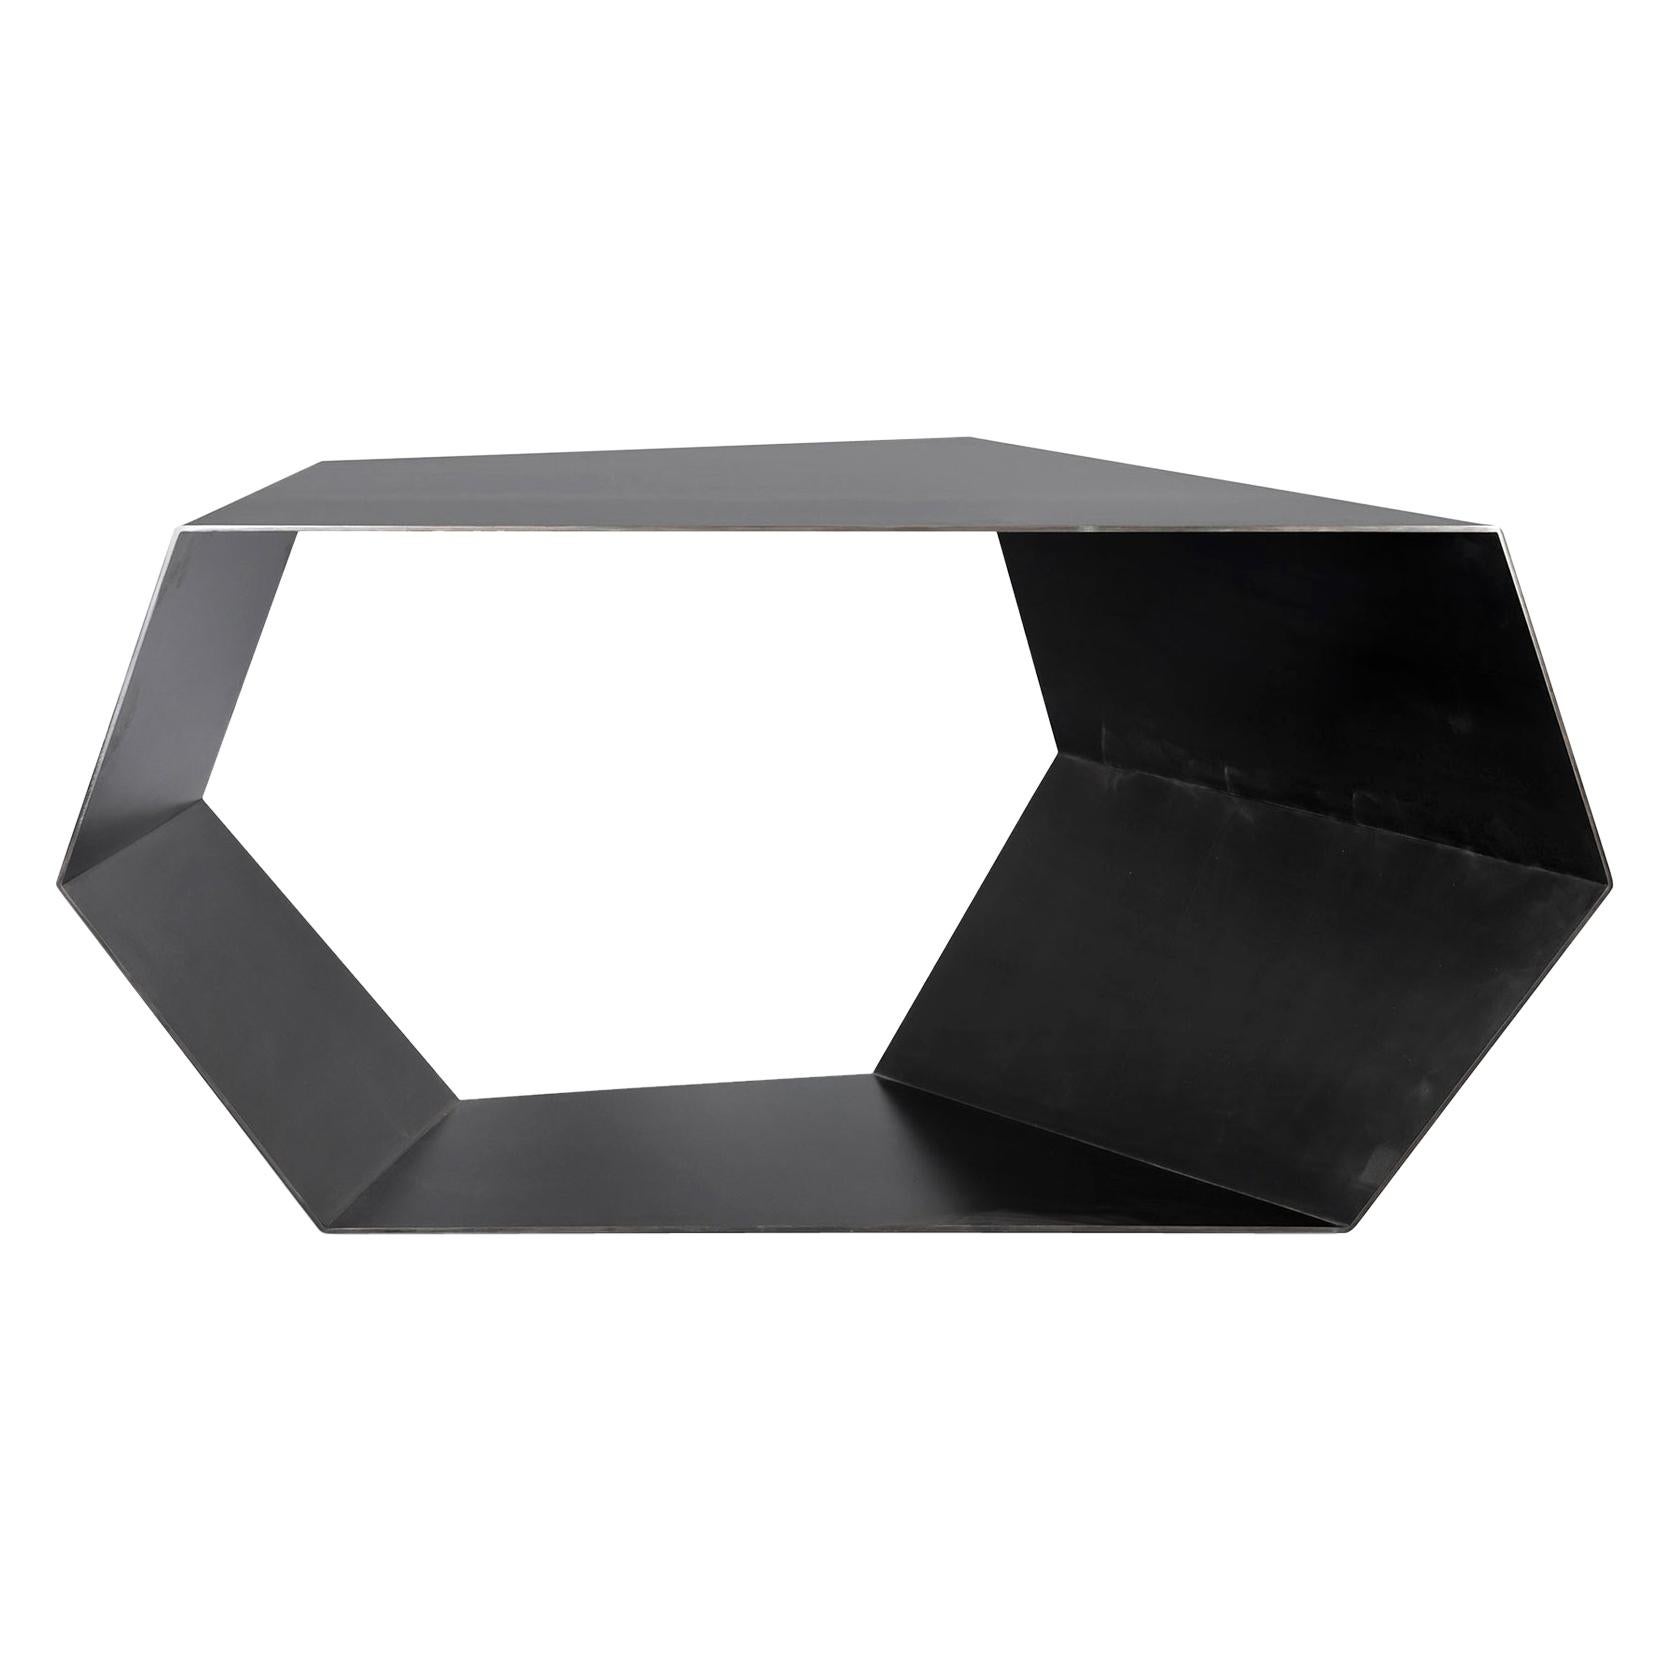 Open Geometric One Piece Steel Center Table with Contemporary Blackened Finish